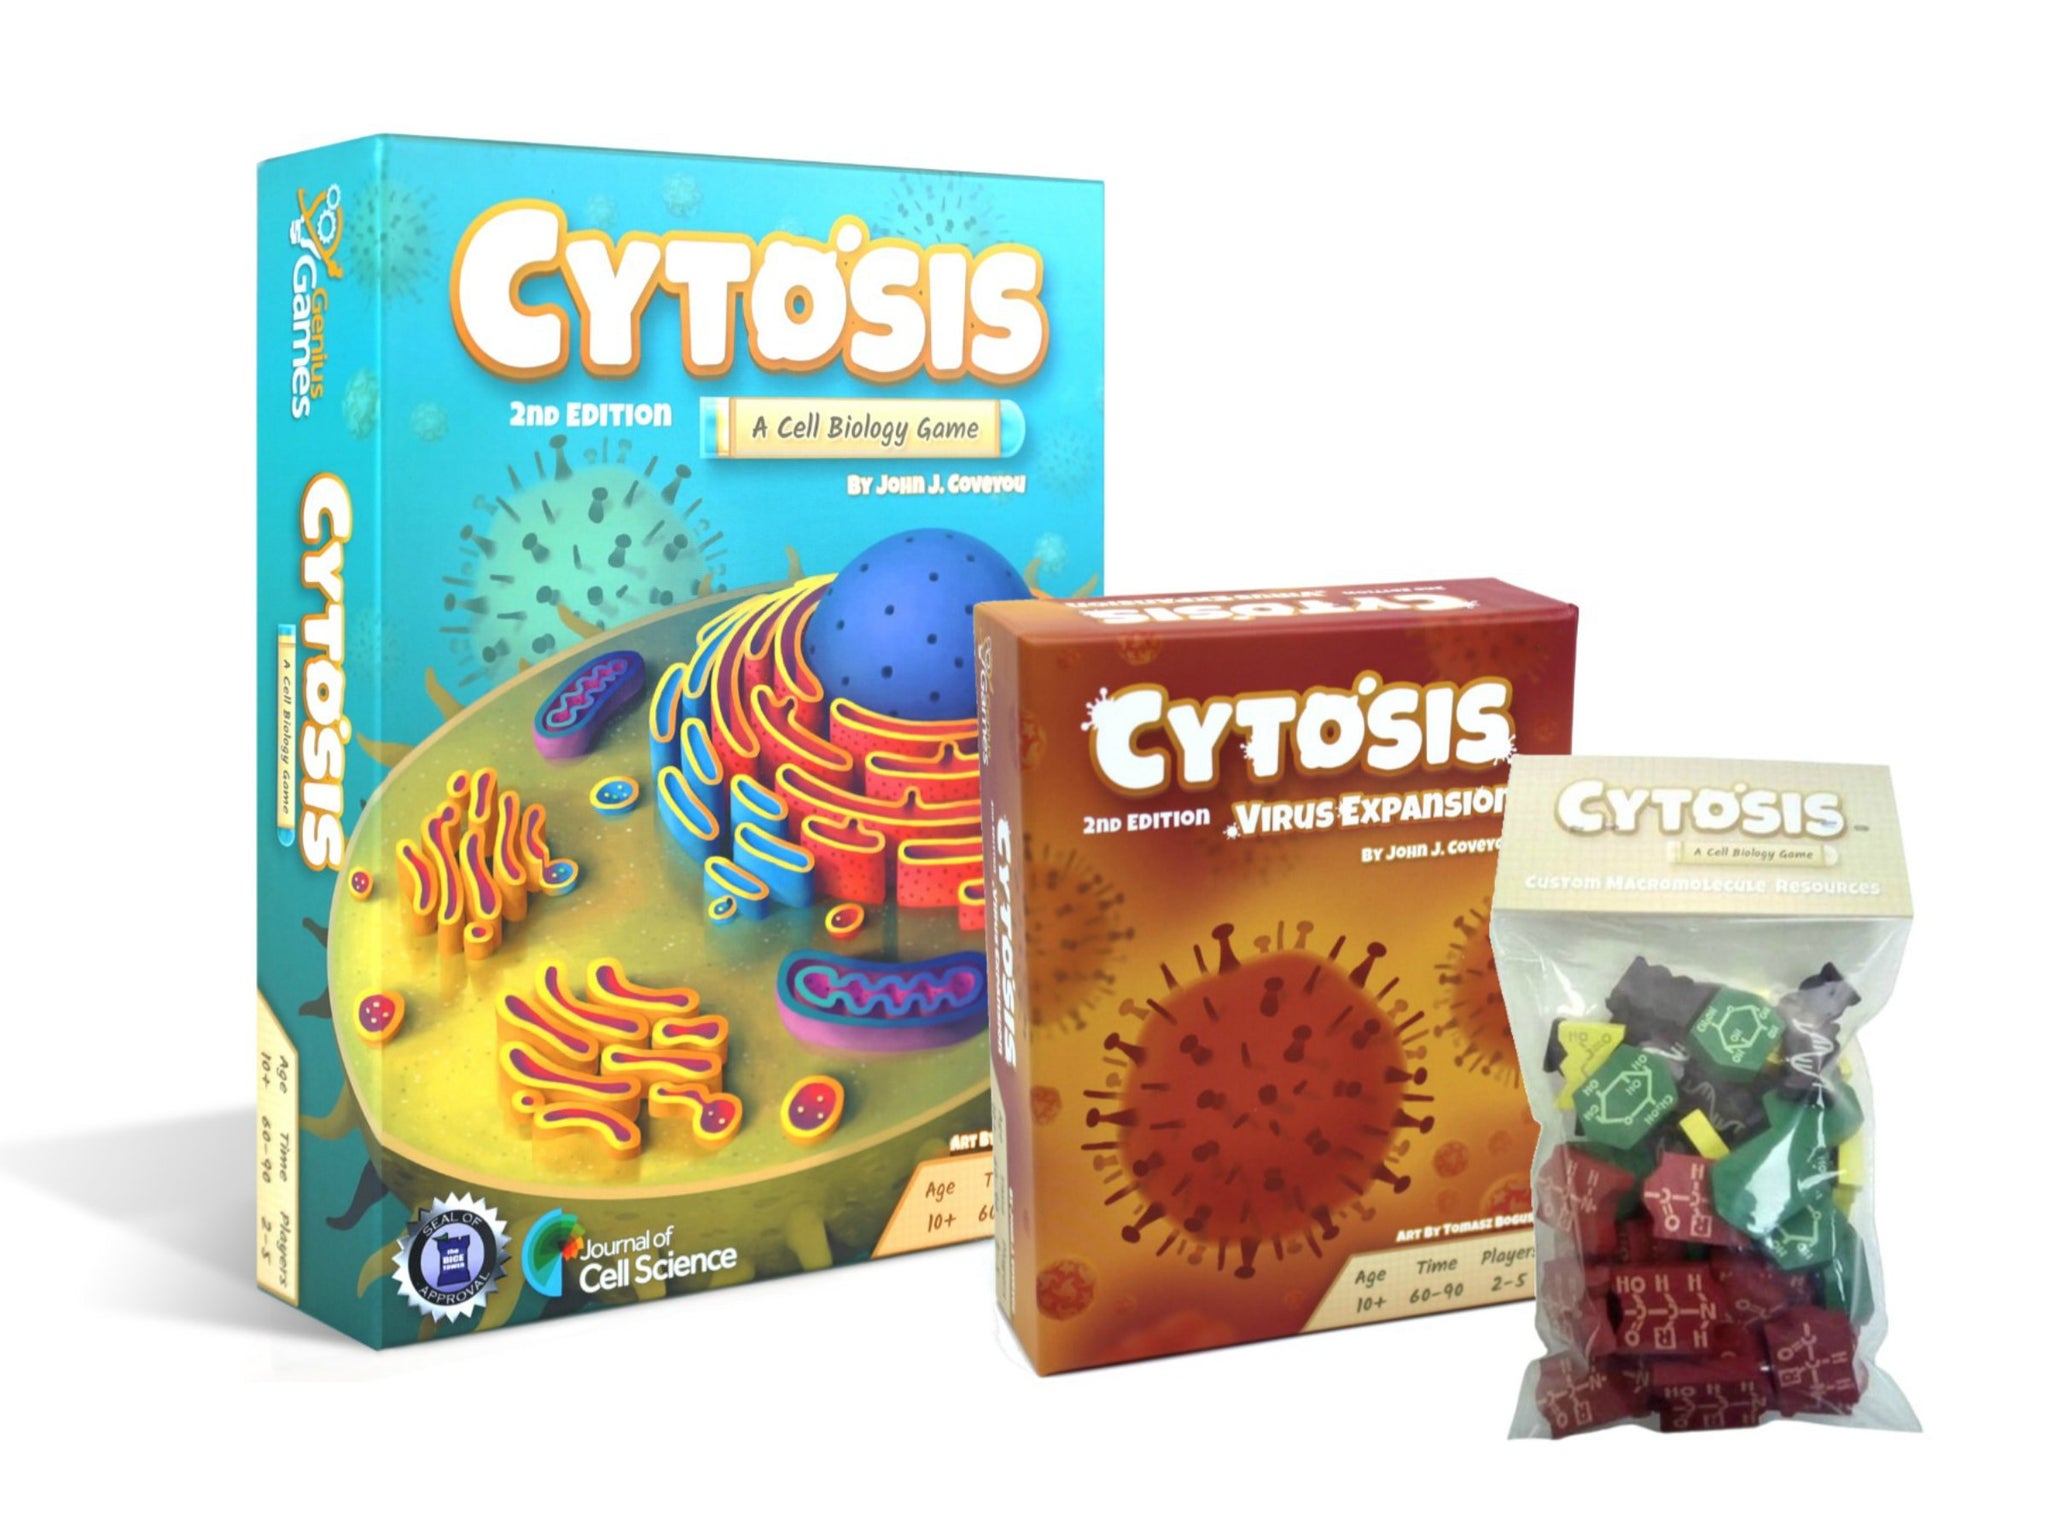 What you can find inside the box of Cytosis: A Cell Biology Game